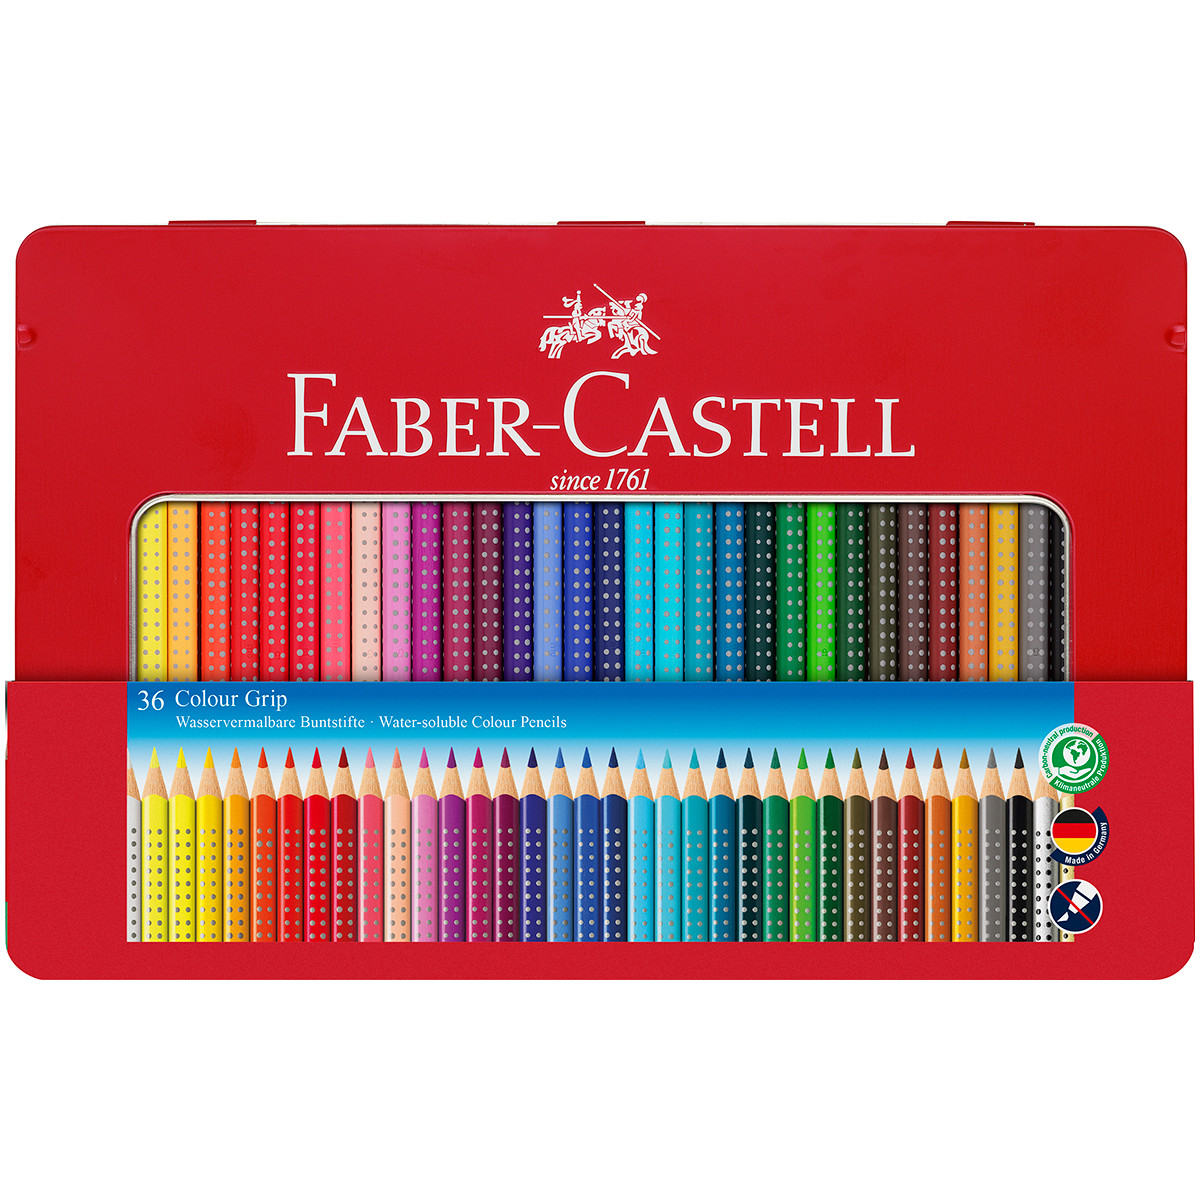 Faber-Castell Colour Grip Pencils - Assorted Colours (Tin of 36)